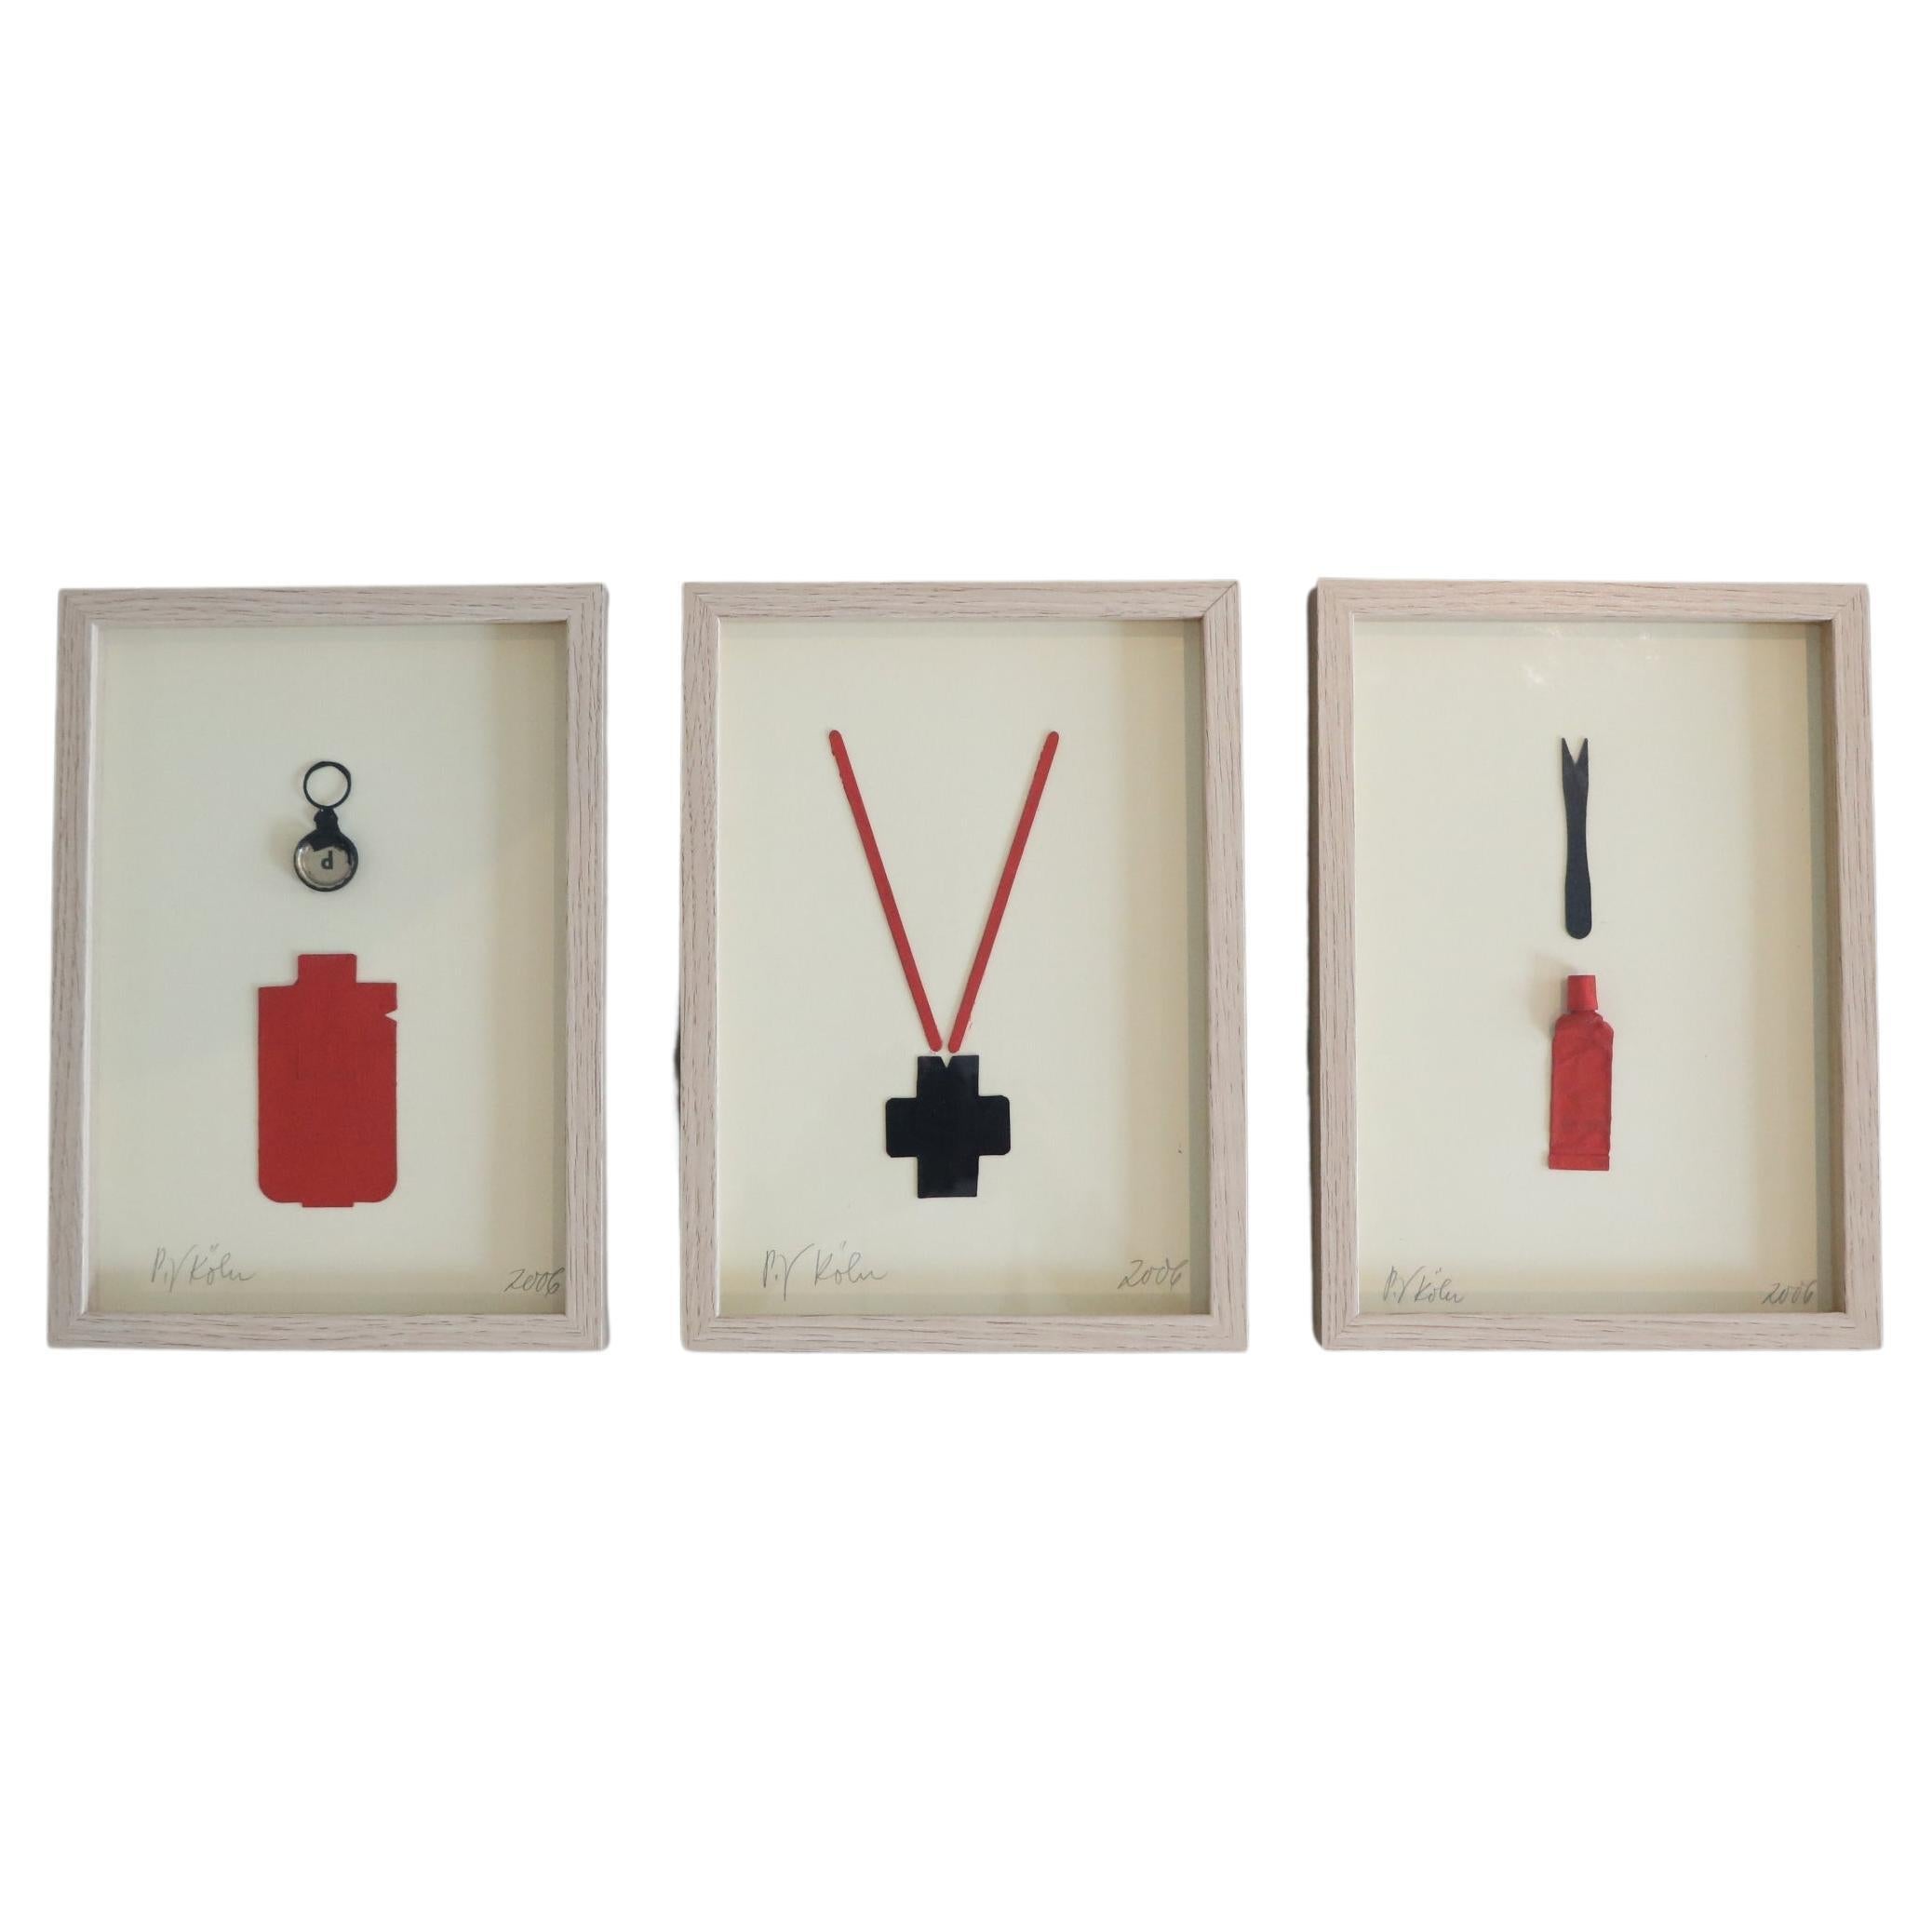 A series of "Fund-Minimalism" by the German artist Peter Krüger 2006 For Sale